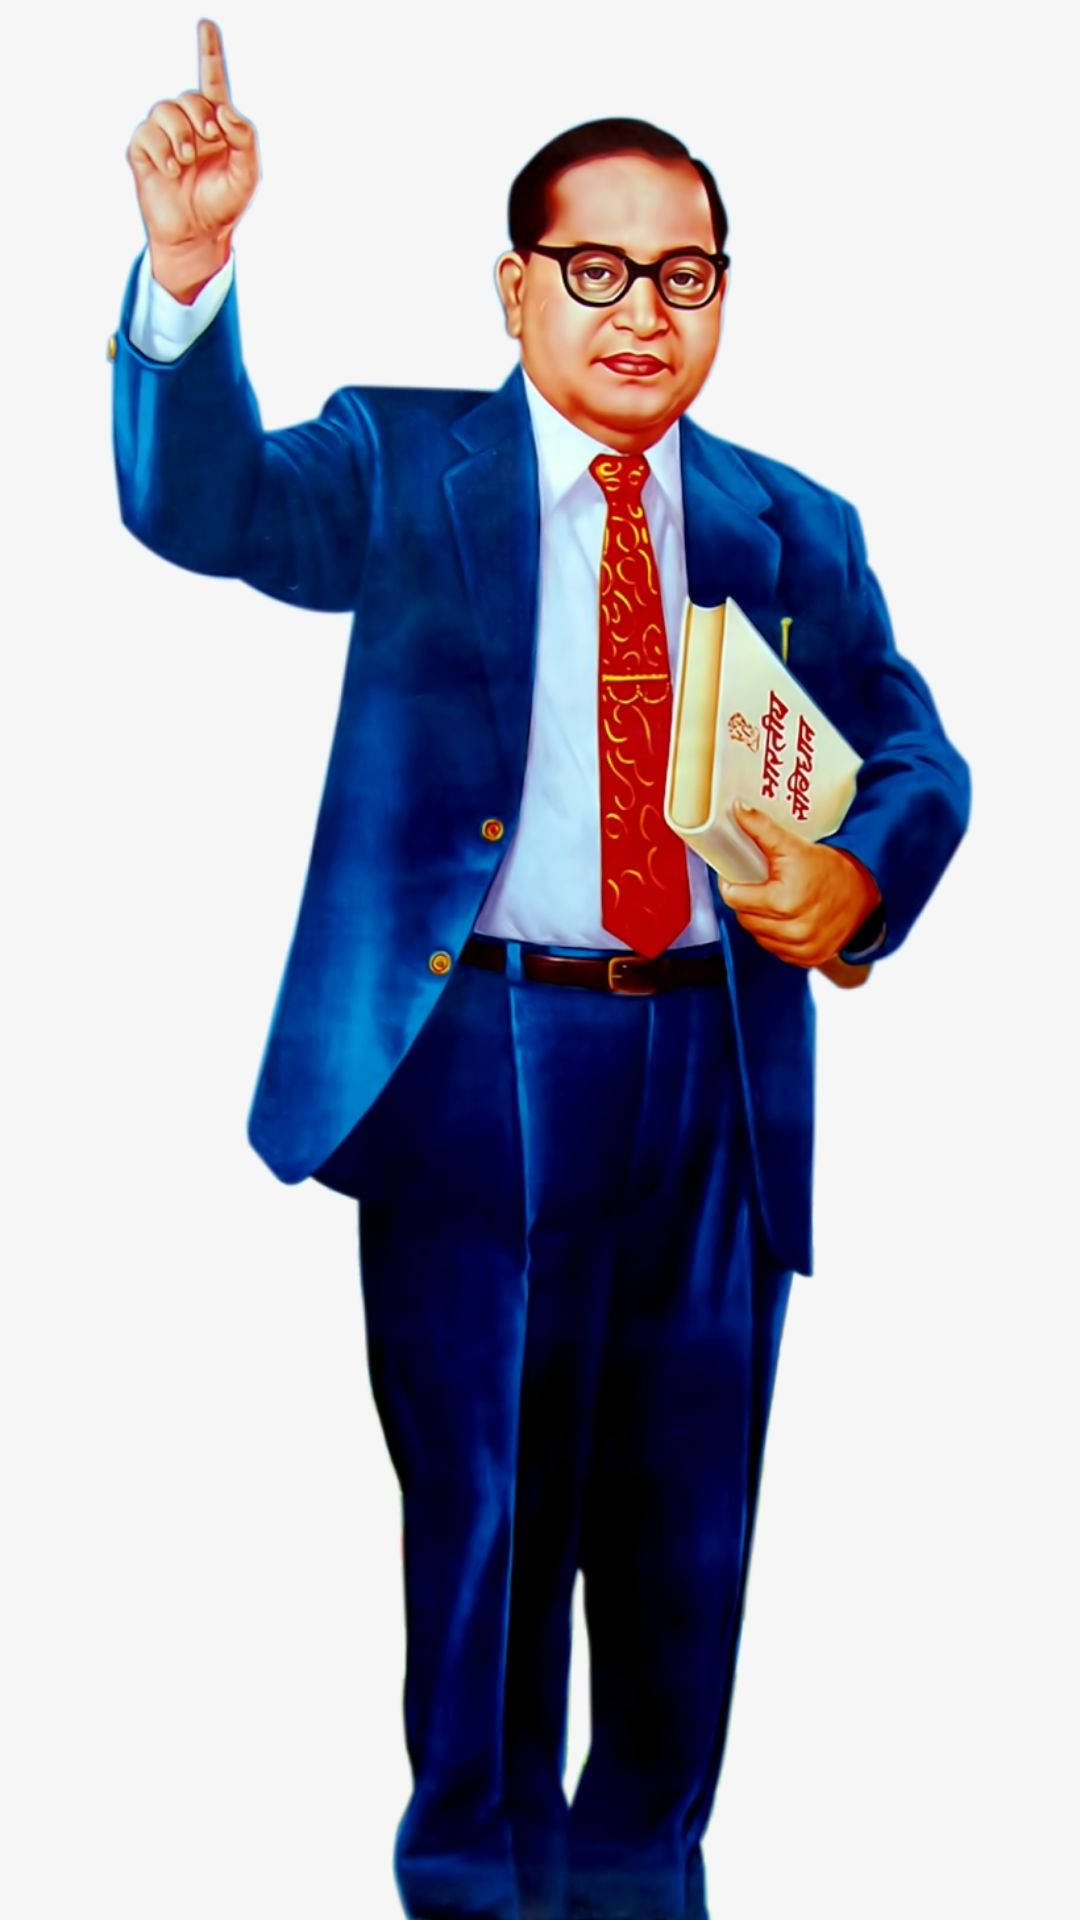 Ambedkar Jayanti Images & Bhim Jayanti 2023 HD Wallpapers for Free Download  Online: Send Happy Babasaheb Ambedkar Jayanti Banners, Quotes and Greetings  on April 14 | 🙏🏻 LatestLY